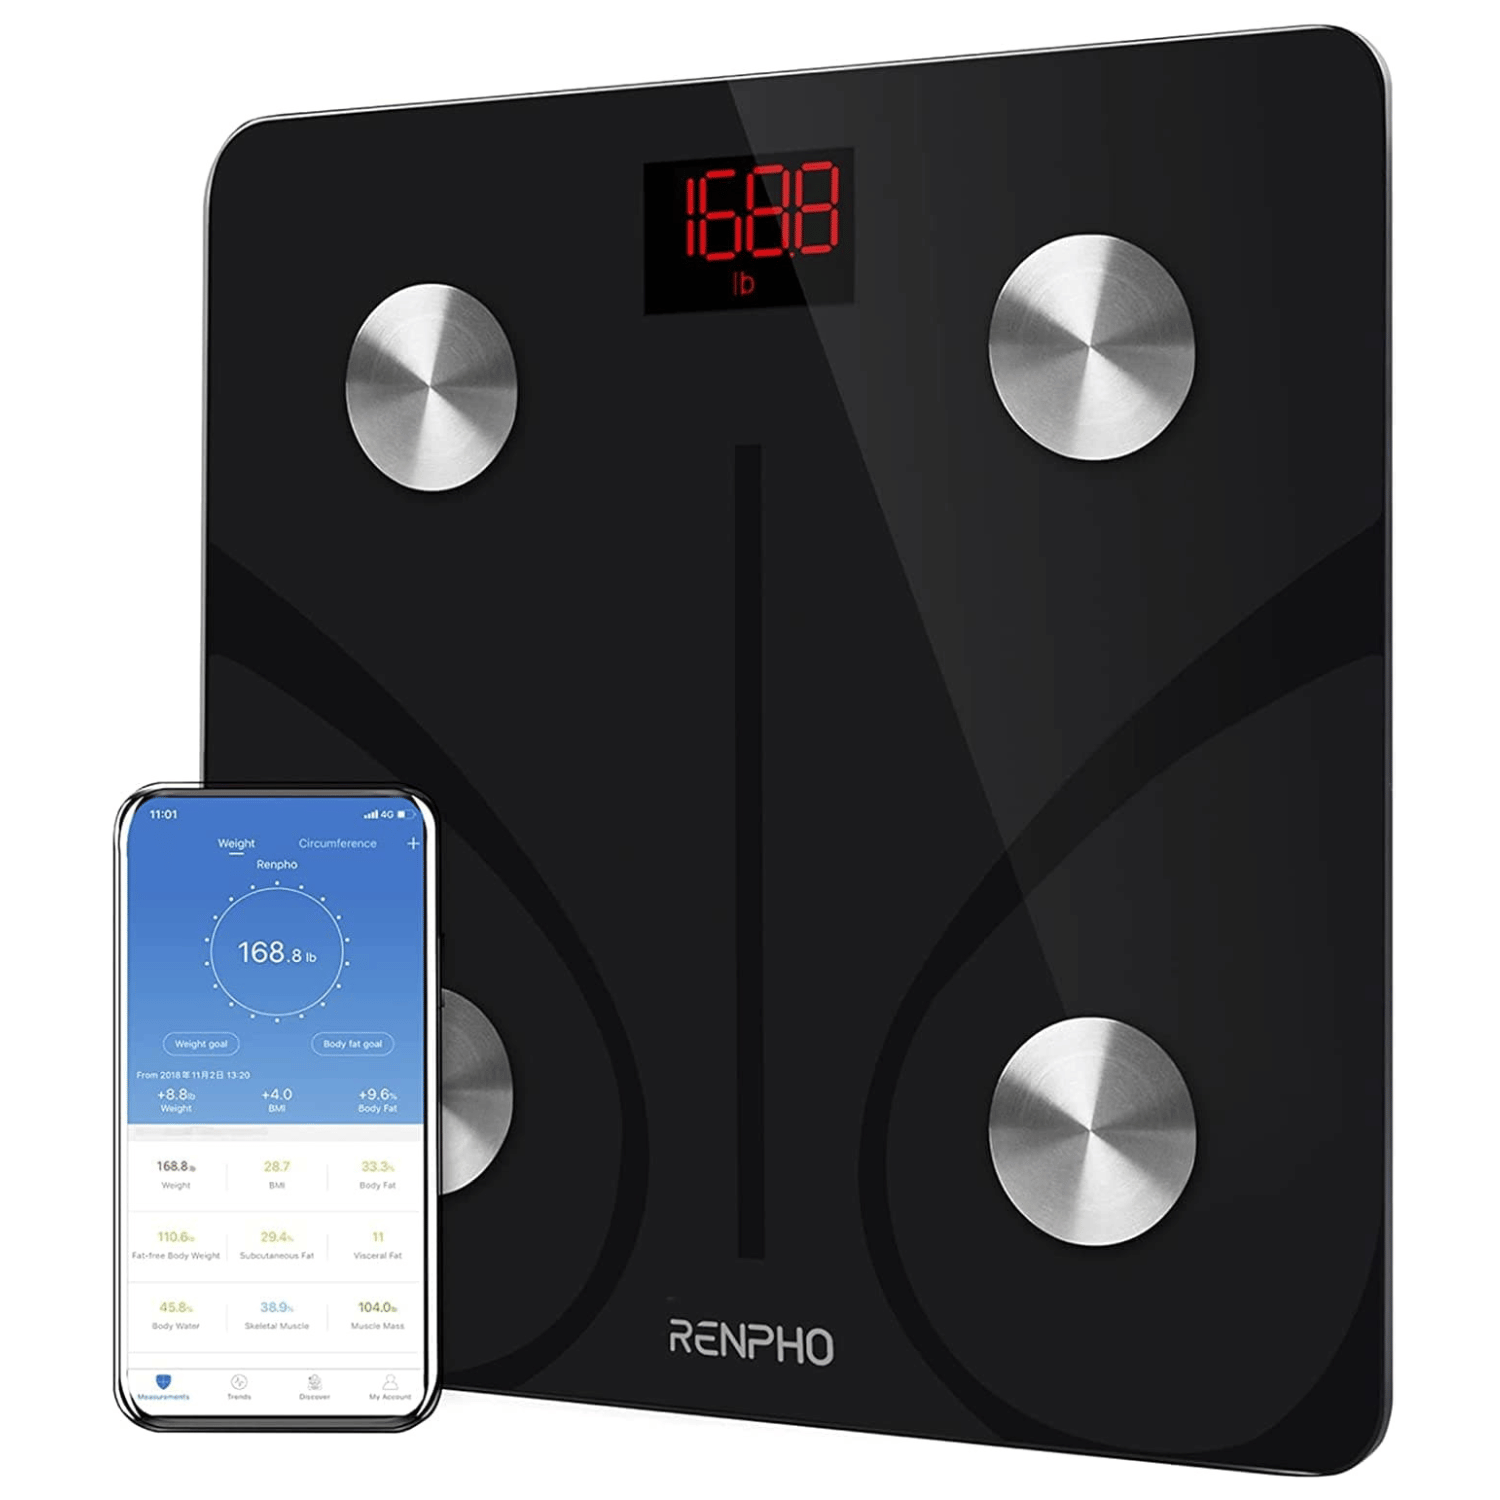 A Renpho KR Elis 1 Smart Body Scale with a smart phone next to it for 웰빙 and 건강.